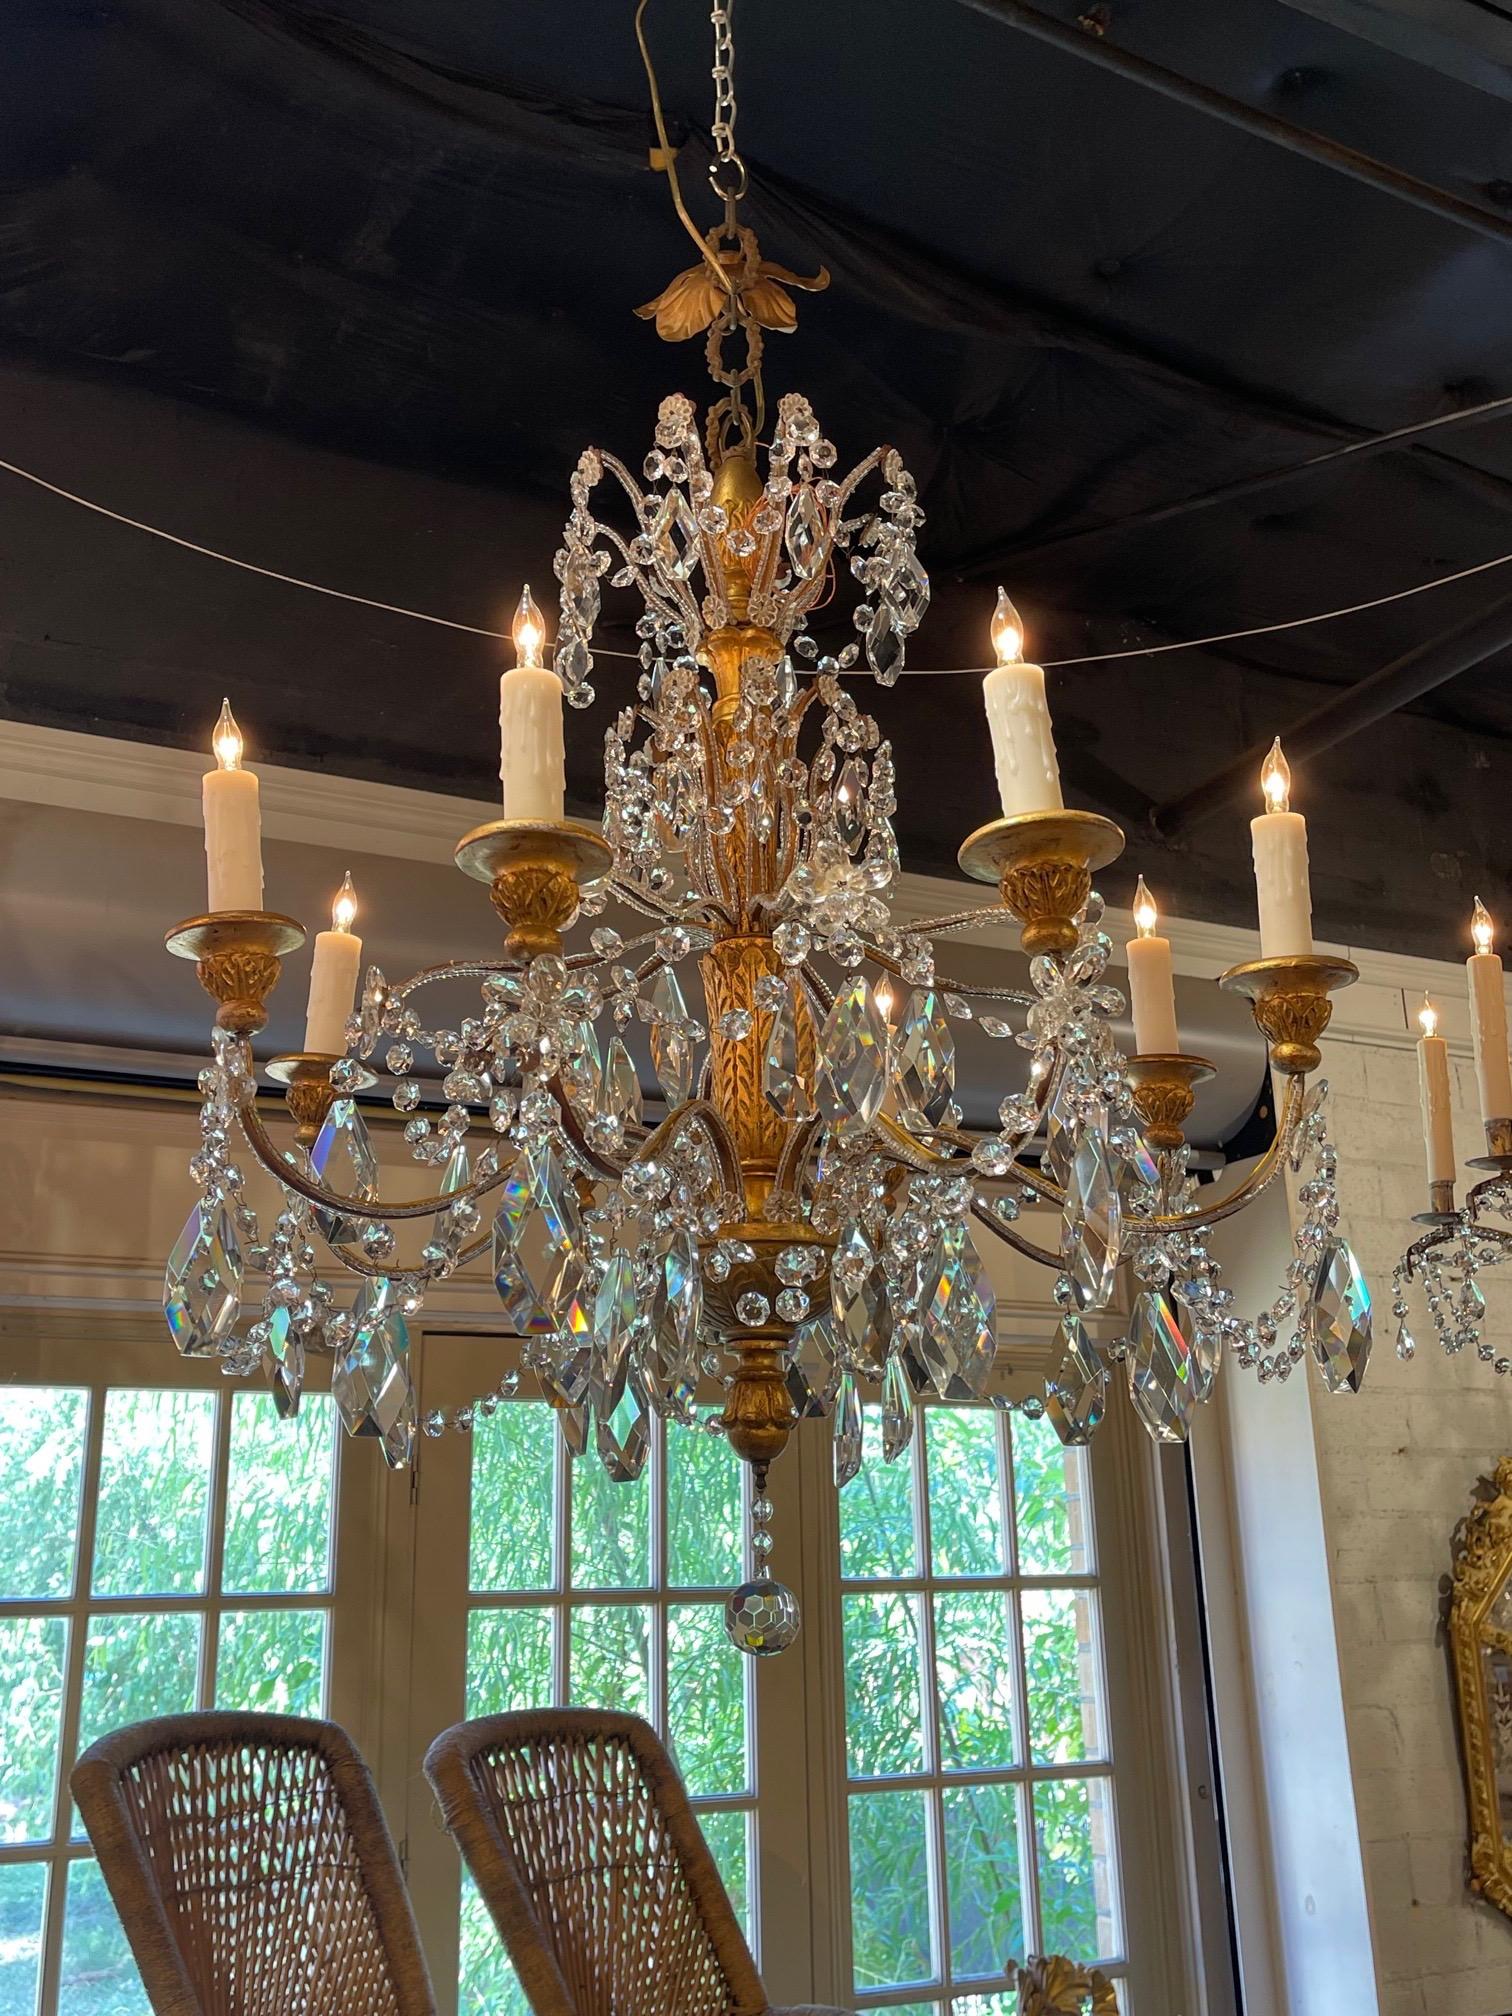 Very fine 19th century beaded crystal and giltwood 8 light chandelier. Lovely carved base and variety of gorgeous crystals and beads. Creates a beautiful classic look!